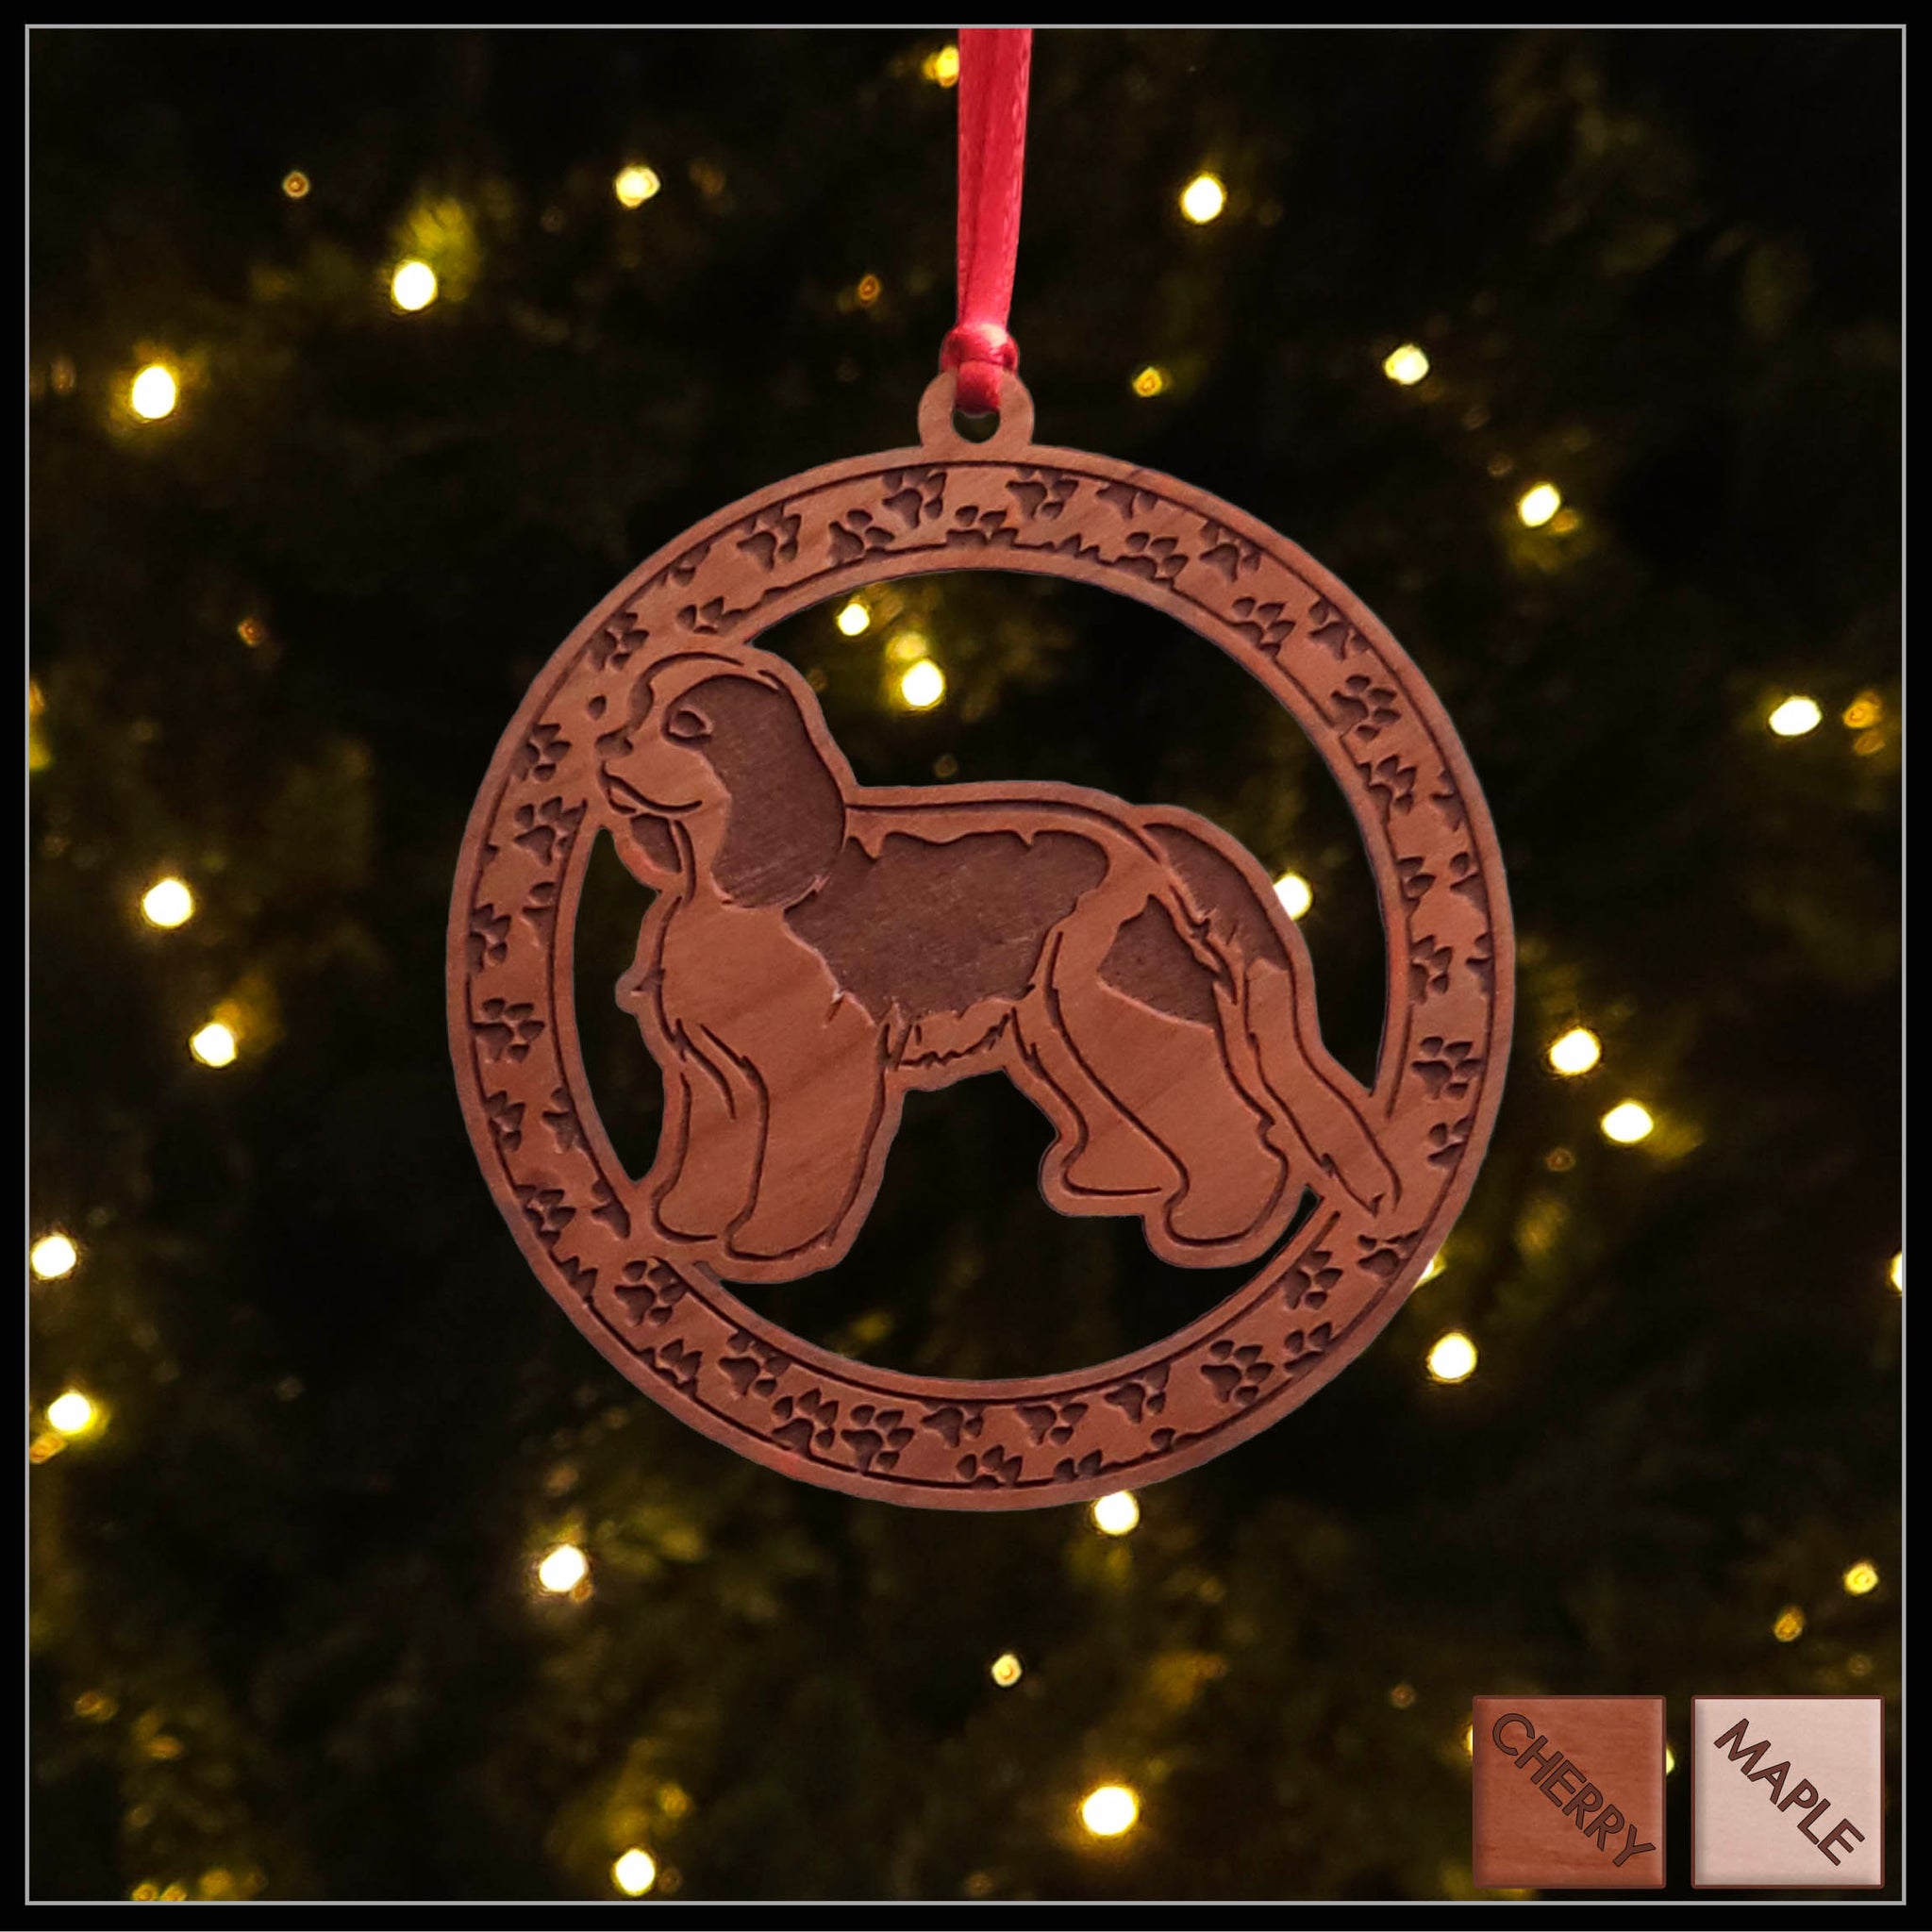 A round cherry wood veneer ornament with a border of small paw prints. The center of the ornament is a Cavalier King Charles dog.